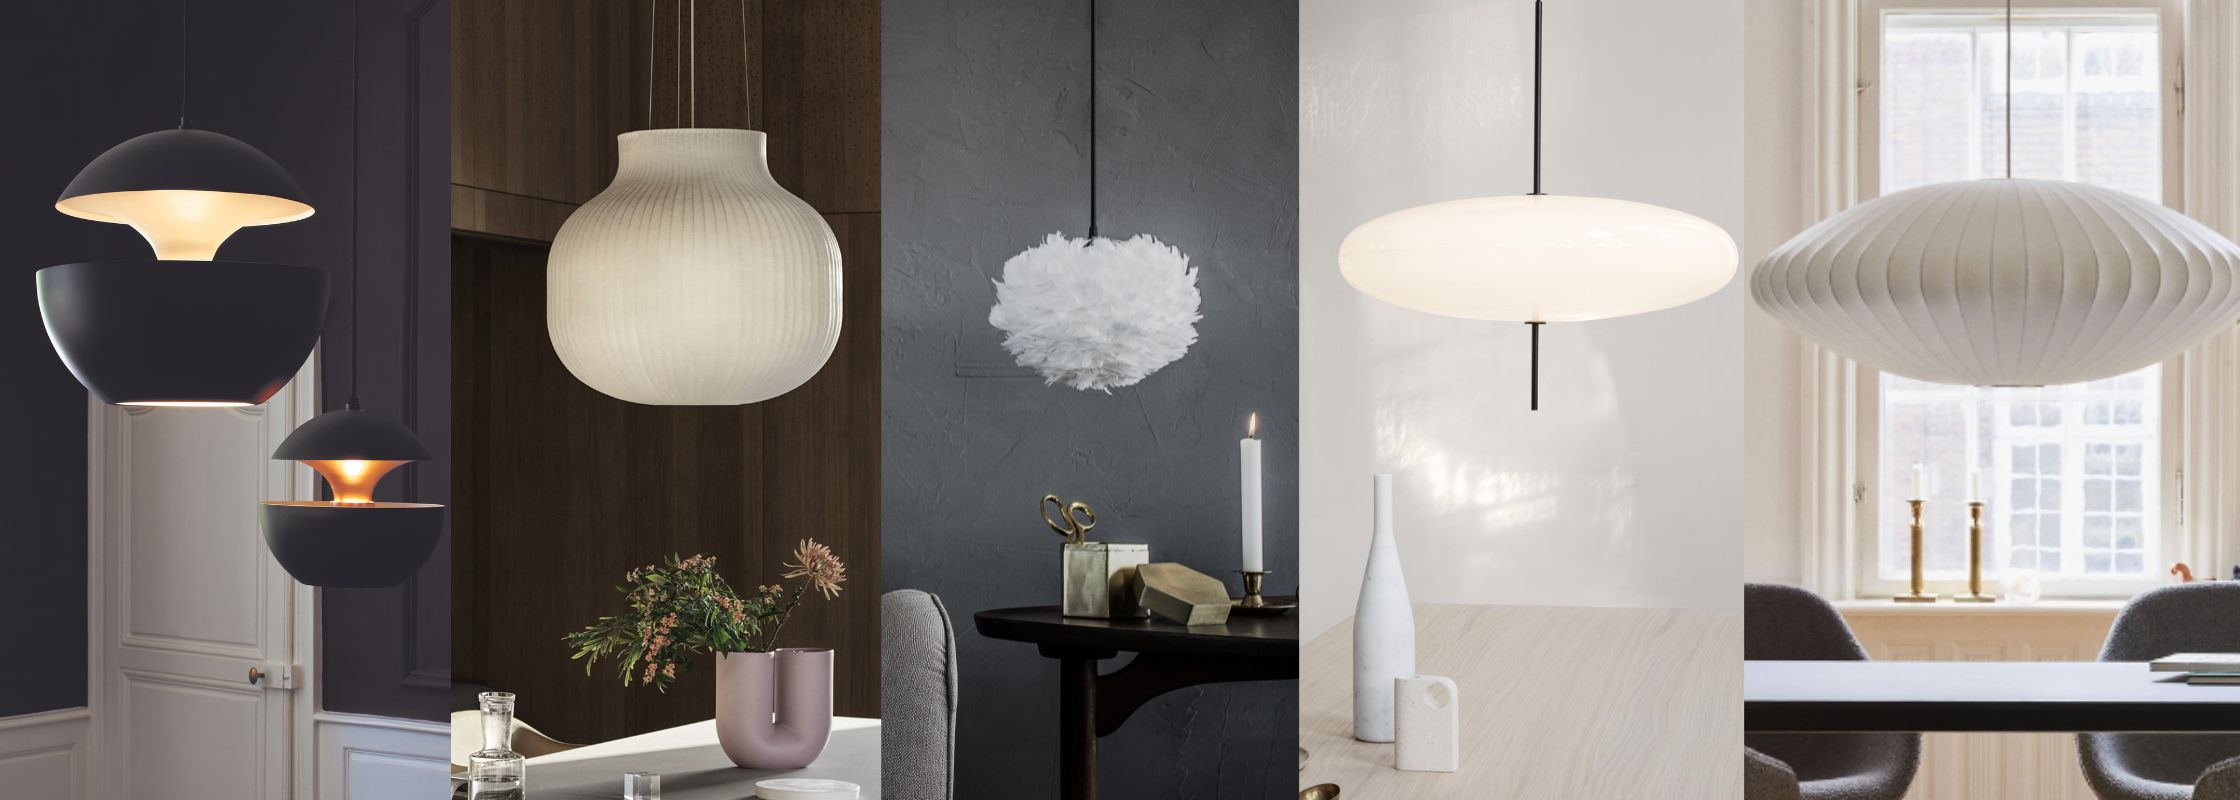 Top 15 pendants for your home